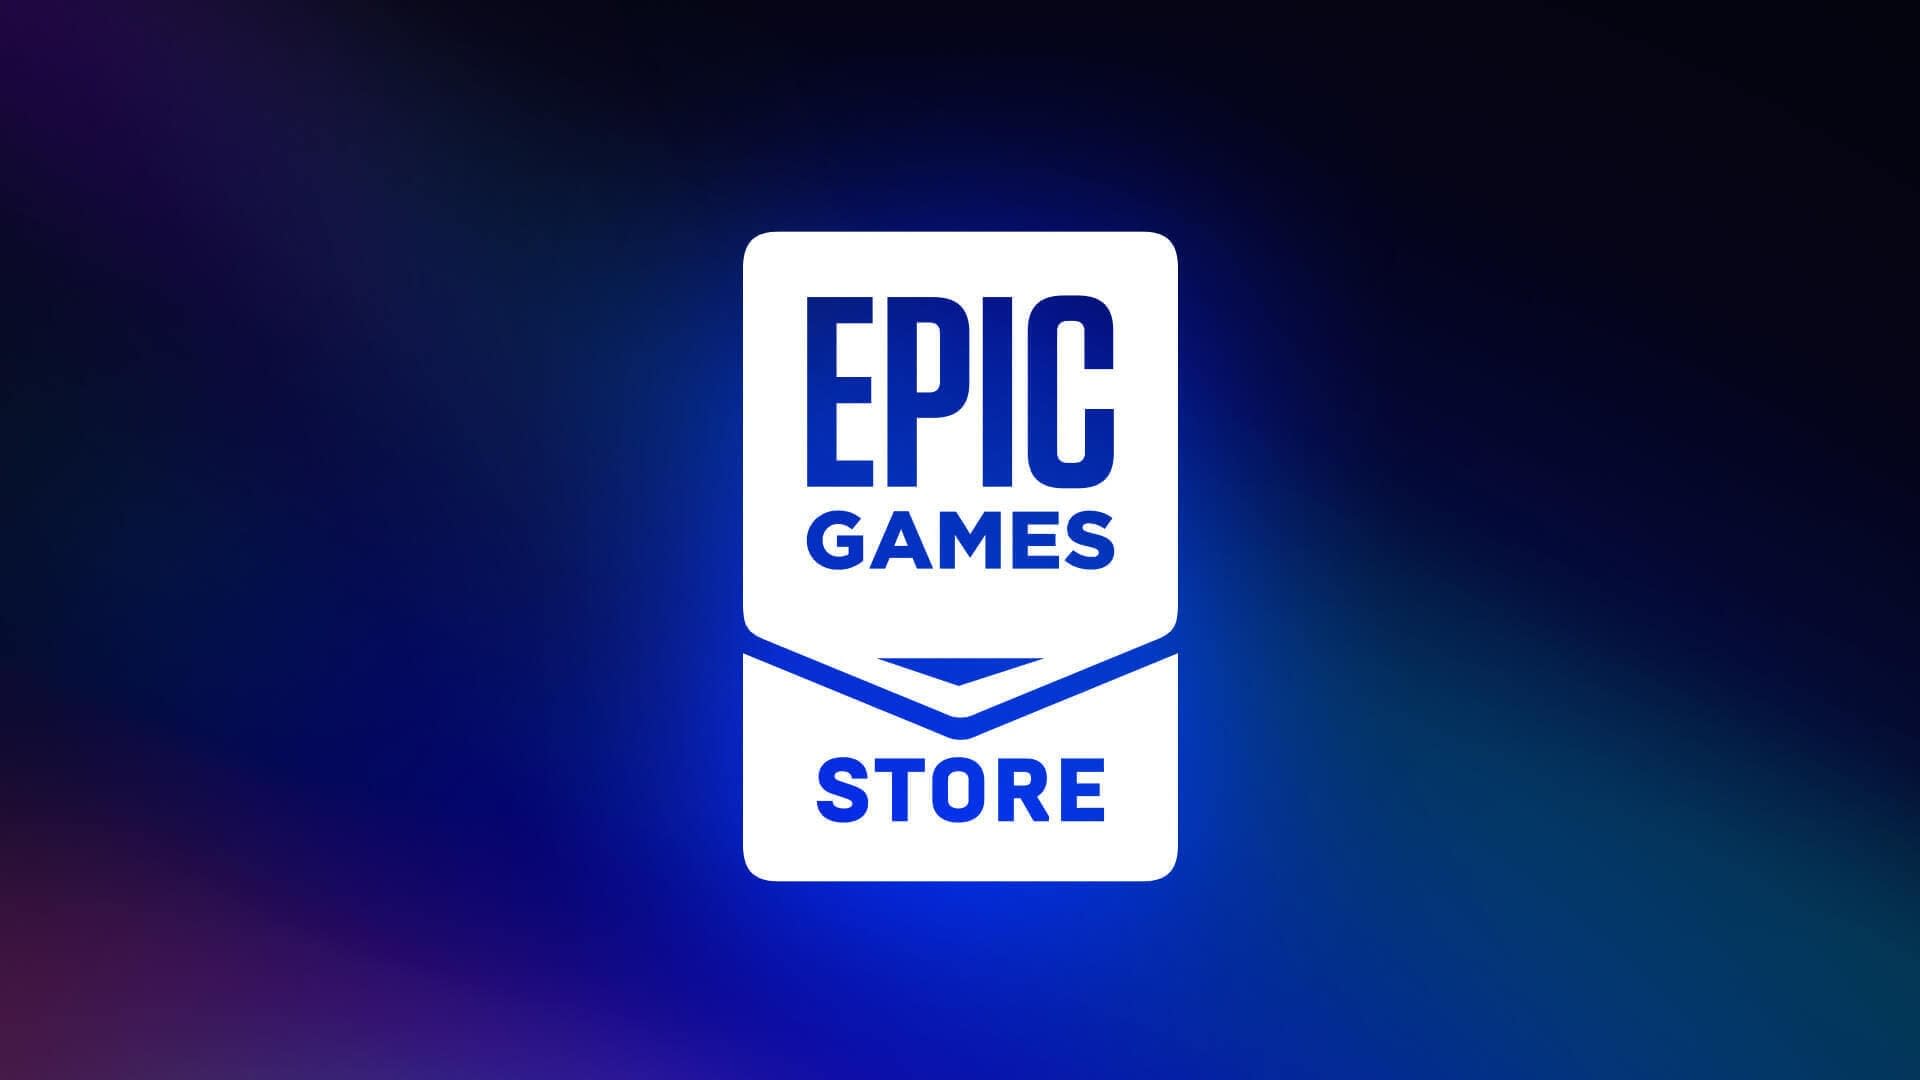 Remember Add Epic Games’s Free Game Today!